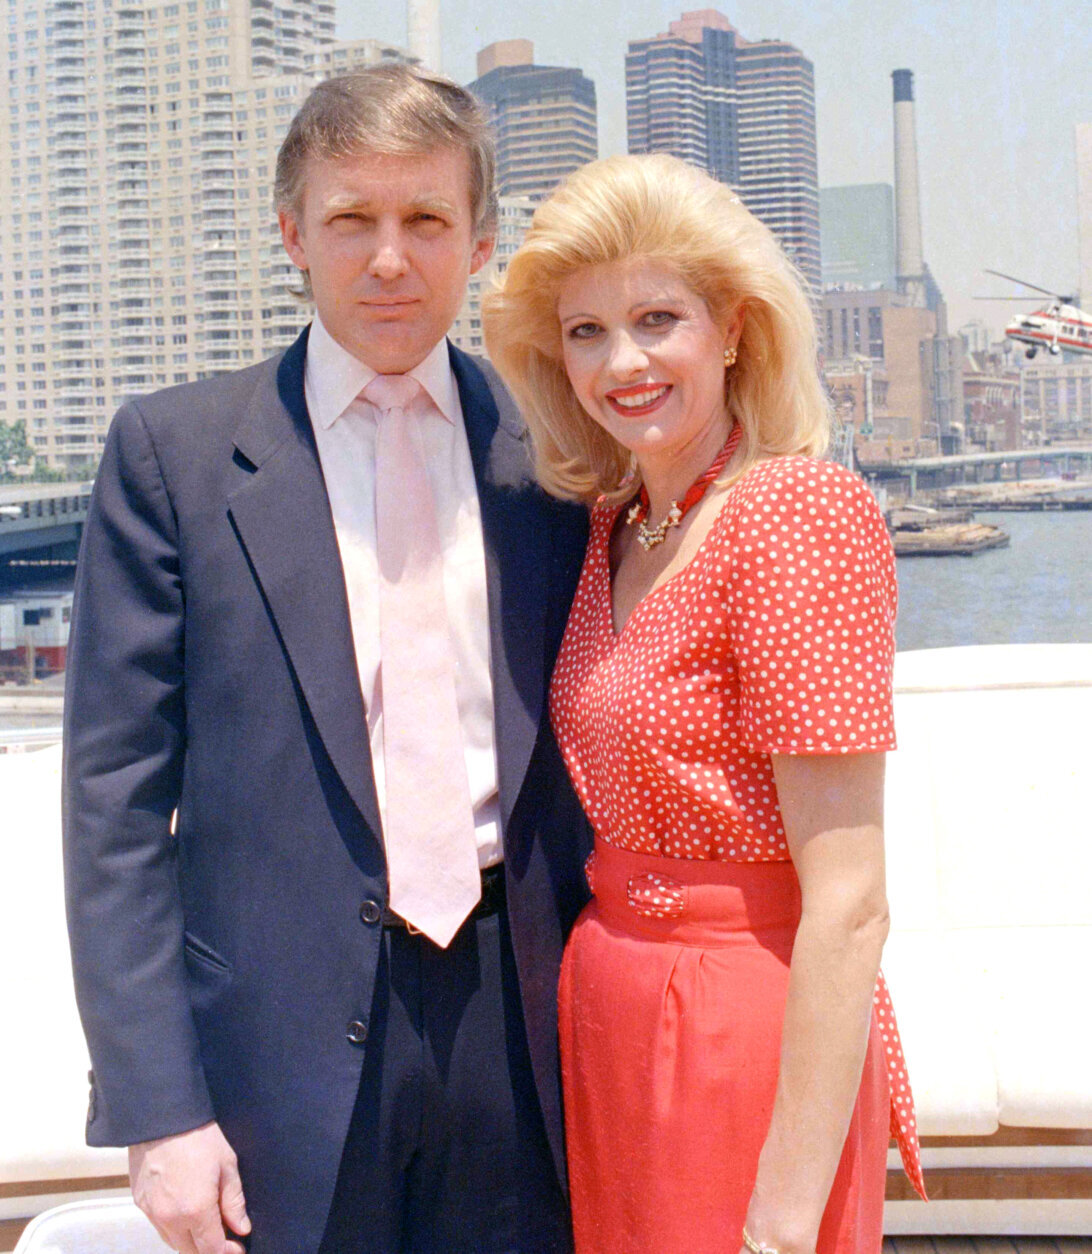 Real estate tycoon Donald Trump and his wife Ivana are pictured aboard his giant yacht Trump Princess on the East River in New York City, July 1988. (AP Photo/Marty Lederhandler)